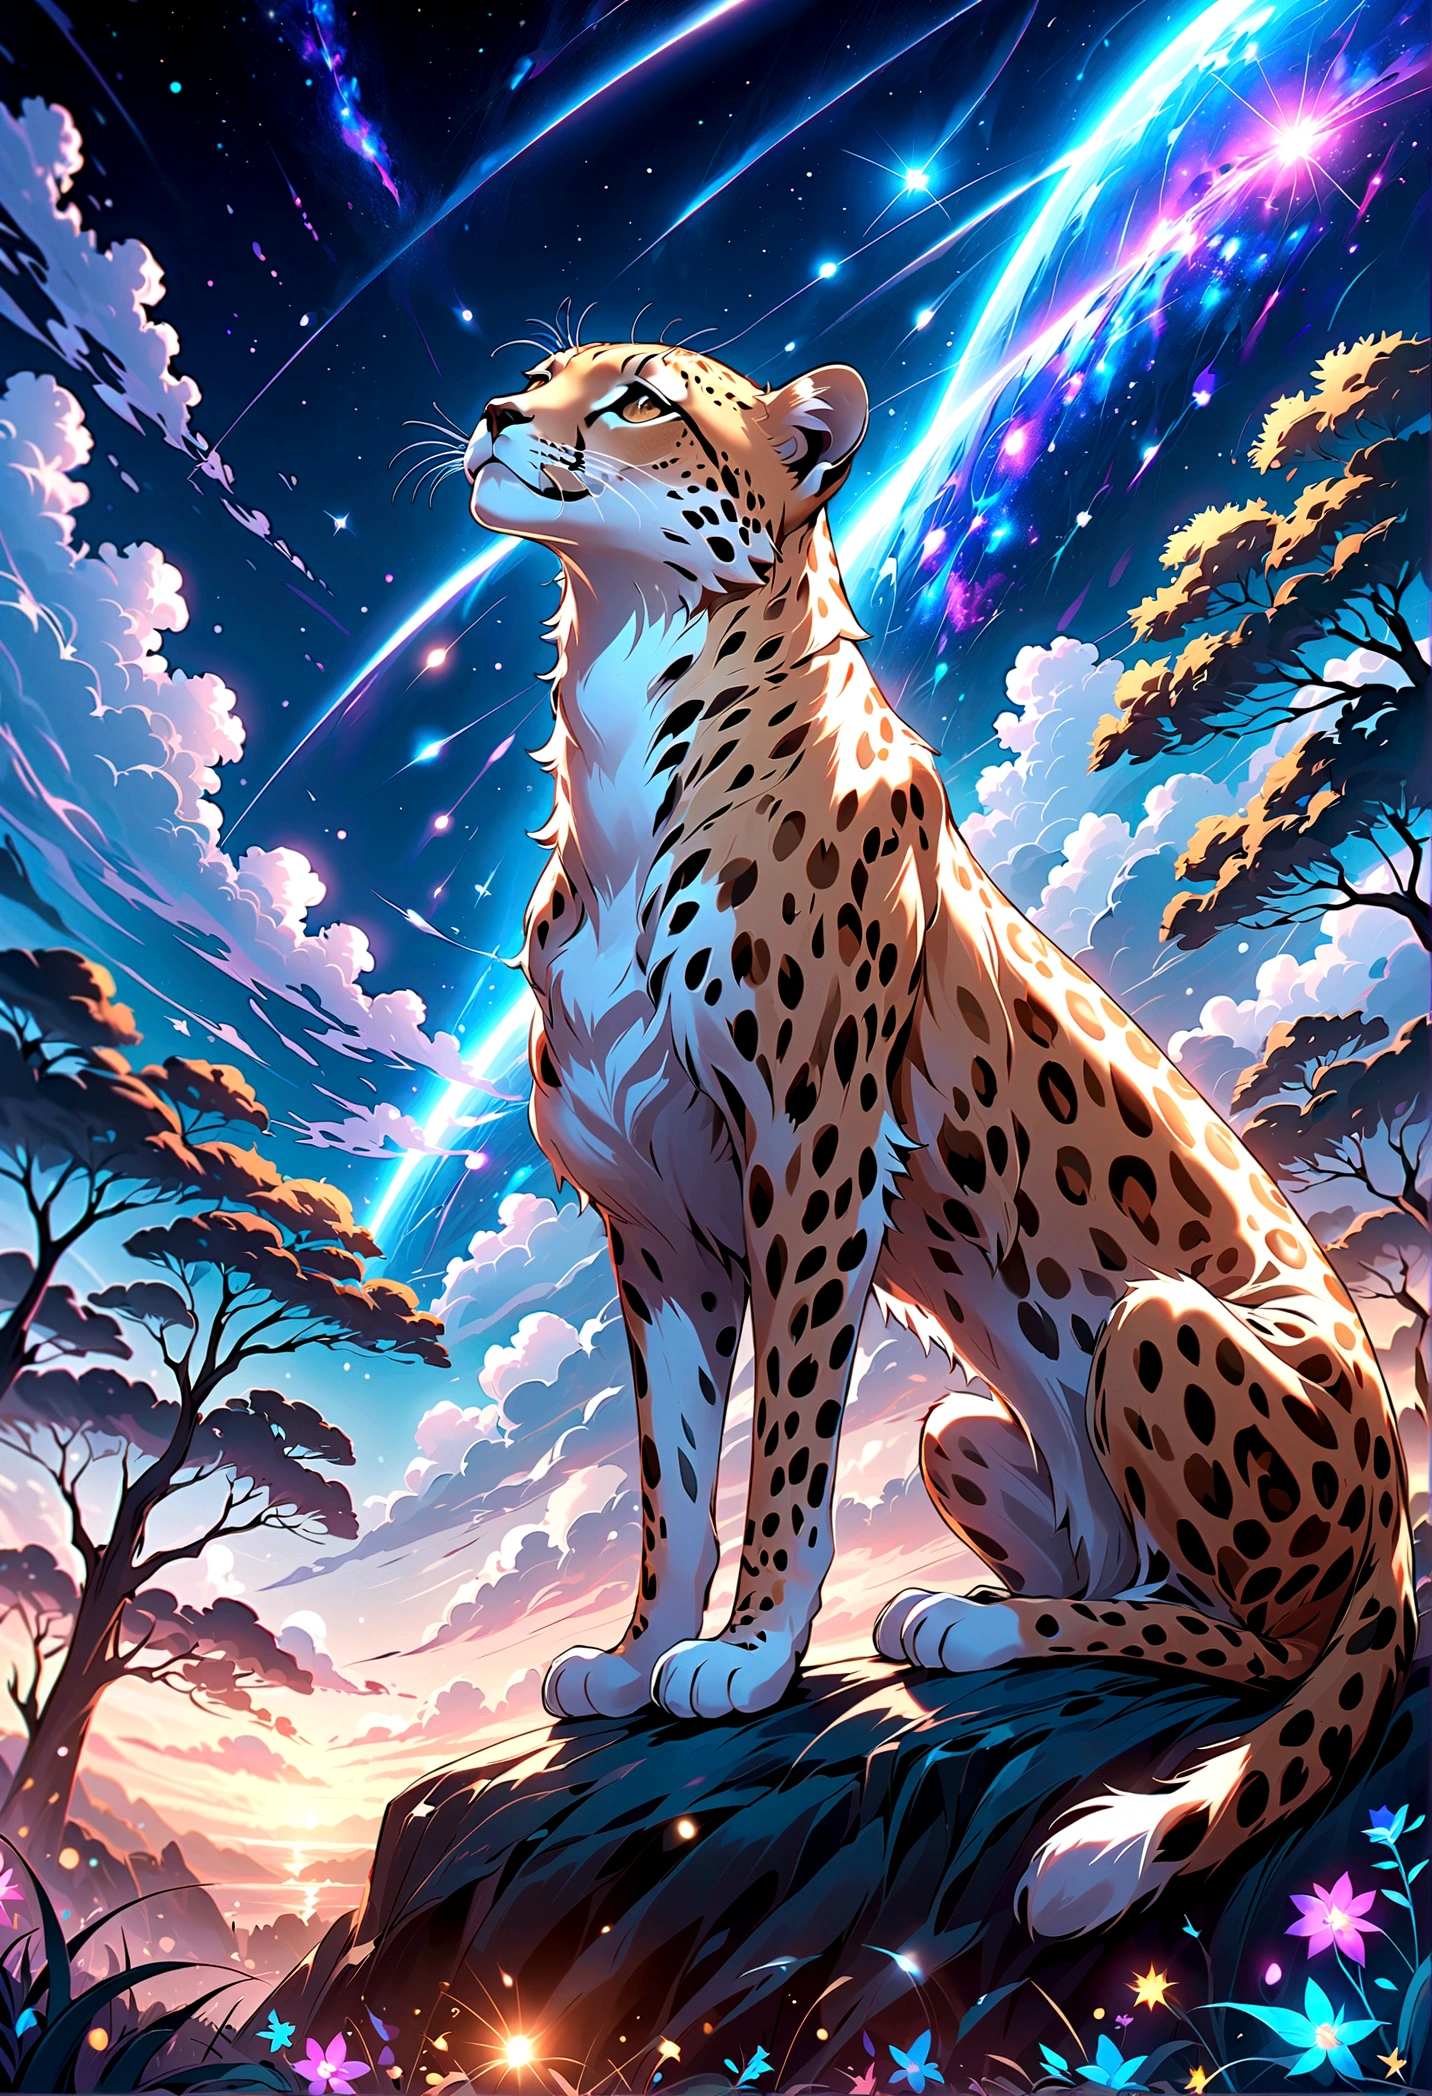 ((Draw a night savannah landscape)),A cheetah looking up at the sky,This is a scene that rose from the depths of sadness and despair.,The theme is "A night of sad and beautiful memories",Match the overall atmosphere of the painting to the theme,A beautiful starry sky spreads out,stardust,Savannah nature,Sparkling,The moonlight gently illuminates the cheetah,anatomically correct,perfect anatomy,Intricate details,Wide range of colors,artwork,rendering,(masterpiece:1.3),(highest quality:1.4),(Super detailed:1.5),High resolution,Very detailed,unity 8k wallpaper,Decadent,Wind,zentangle,absurd